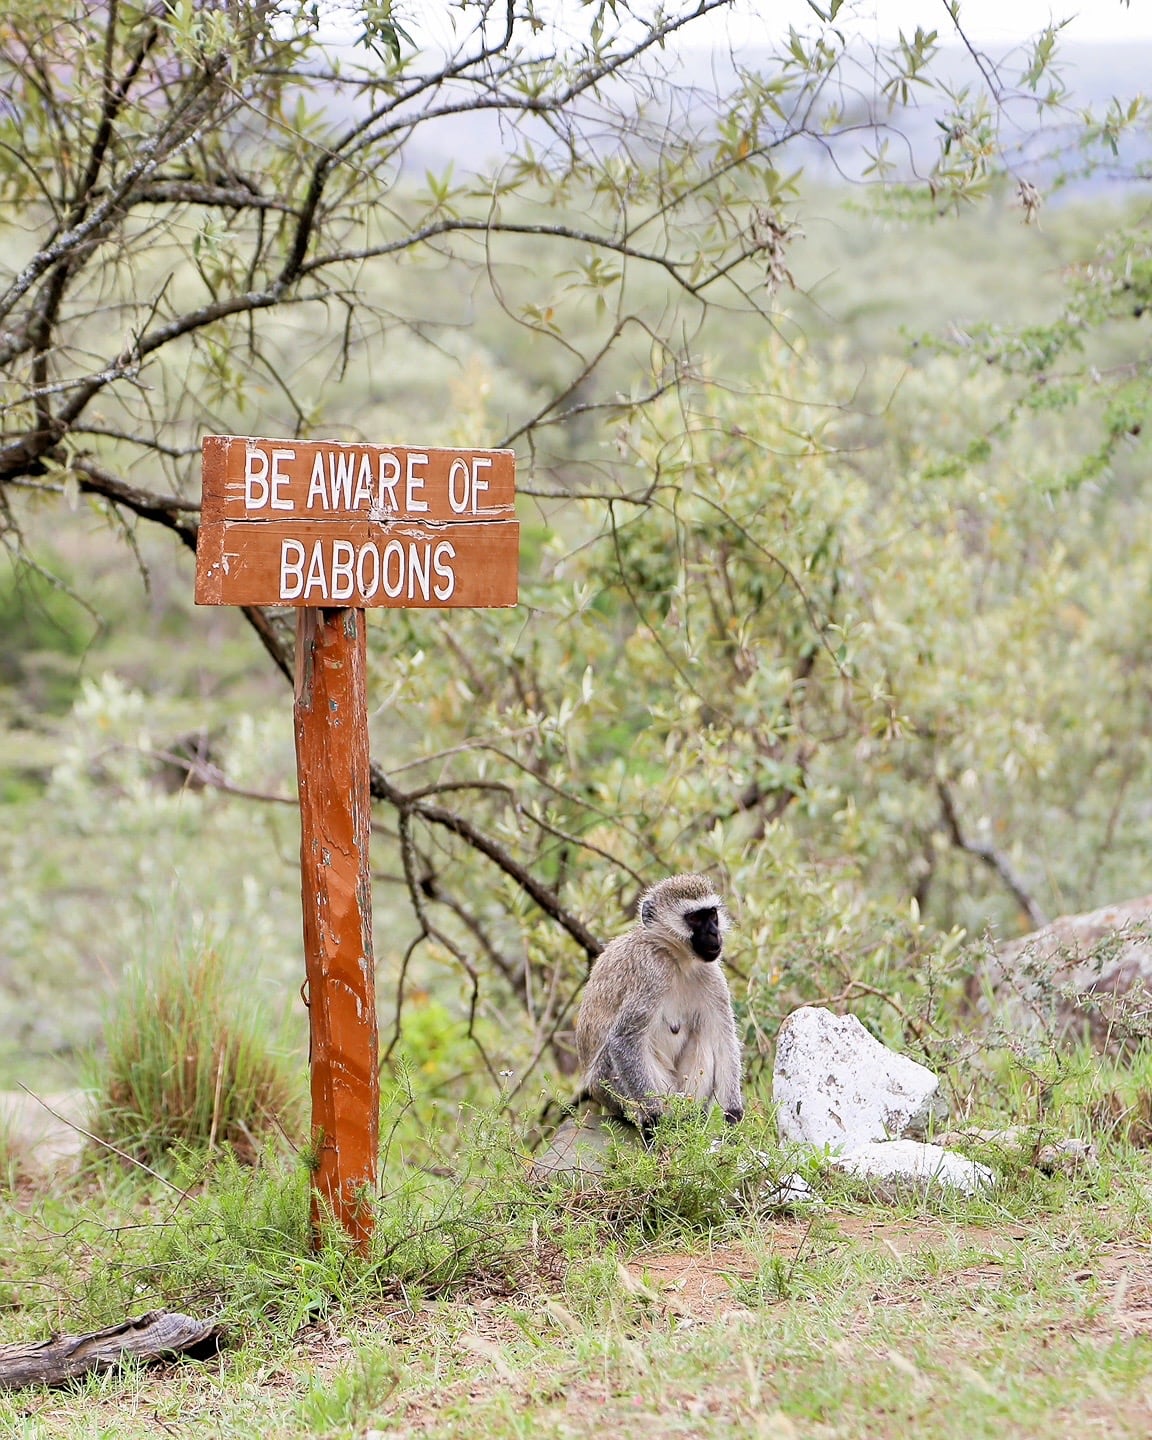 Baboon and sign at wildlife reserve in Kenya